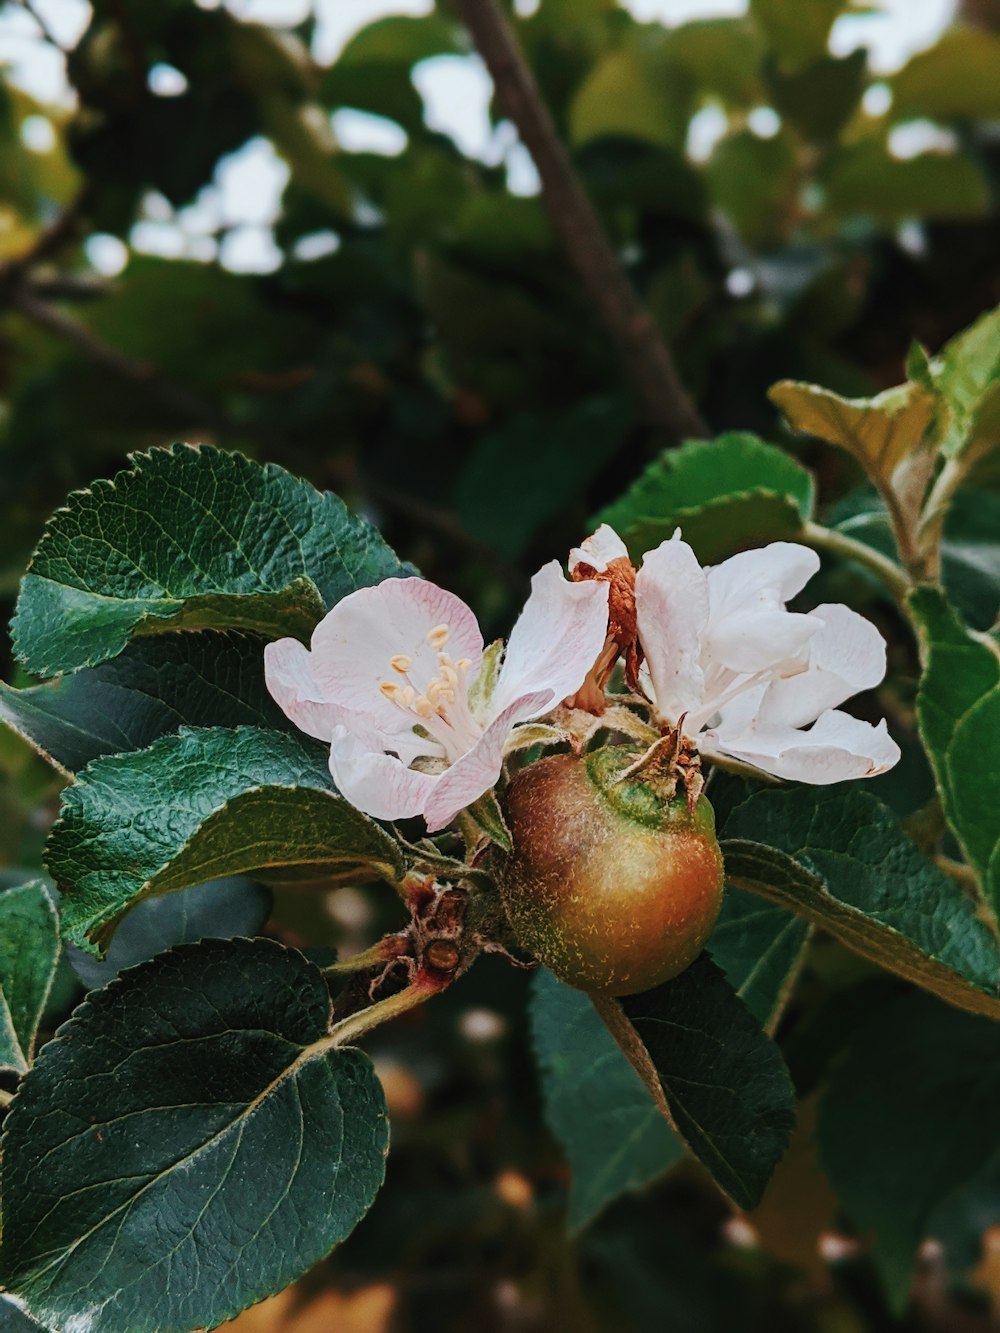 red apple fruit with white flower